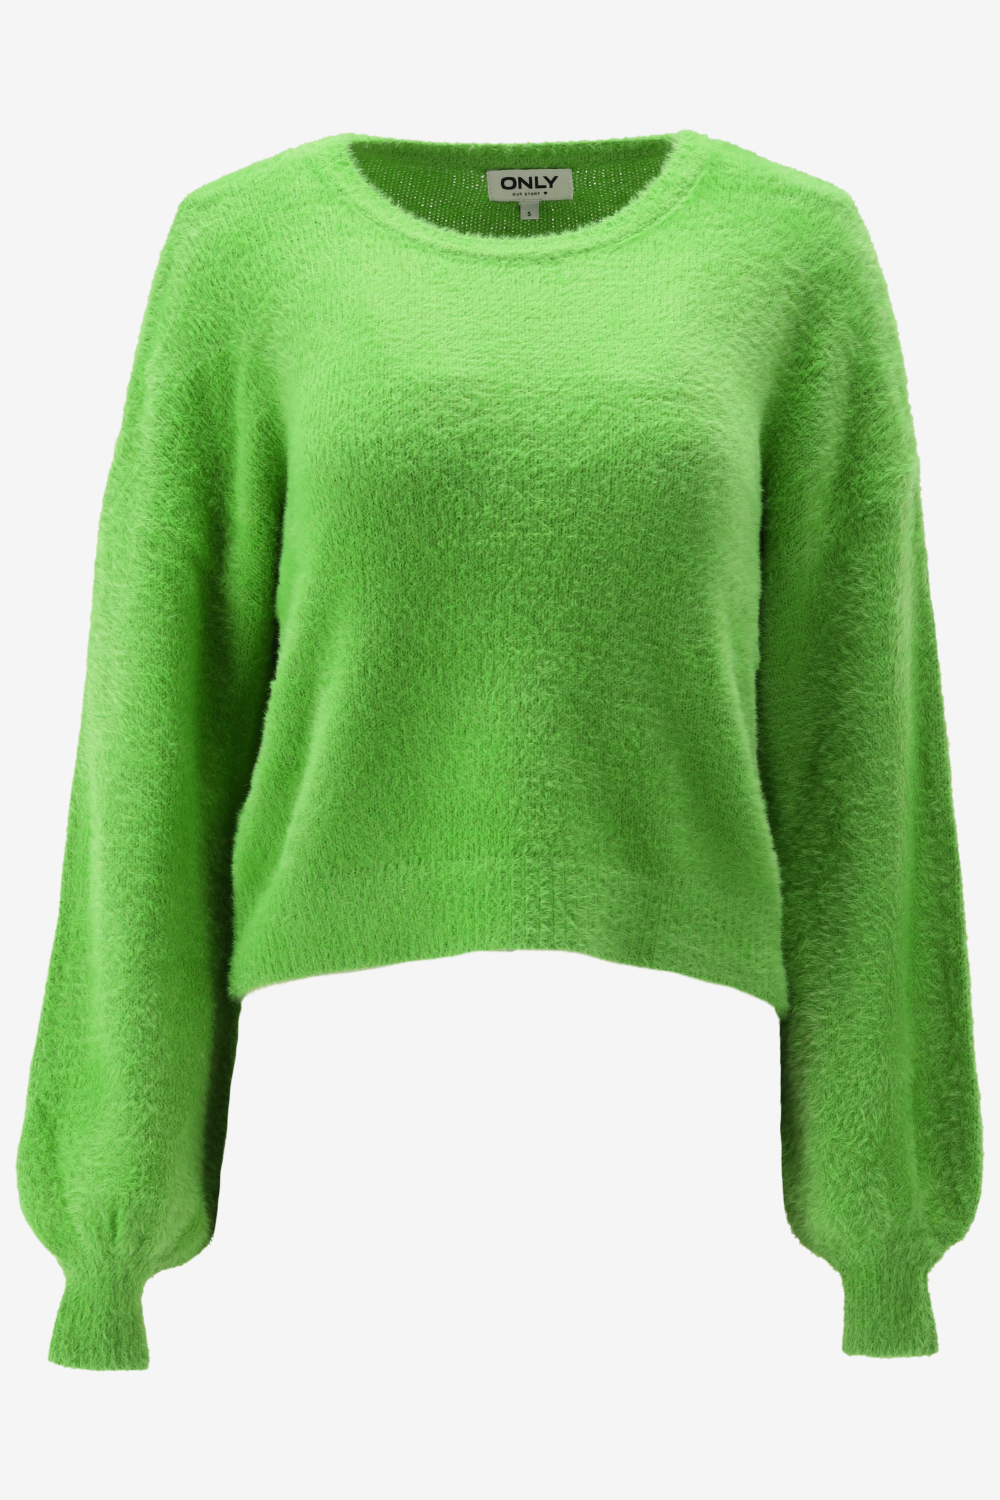 Only Piumo L/s Pullover Island Green GROEN M